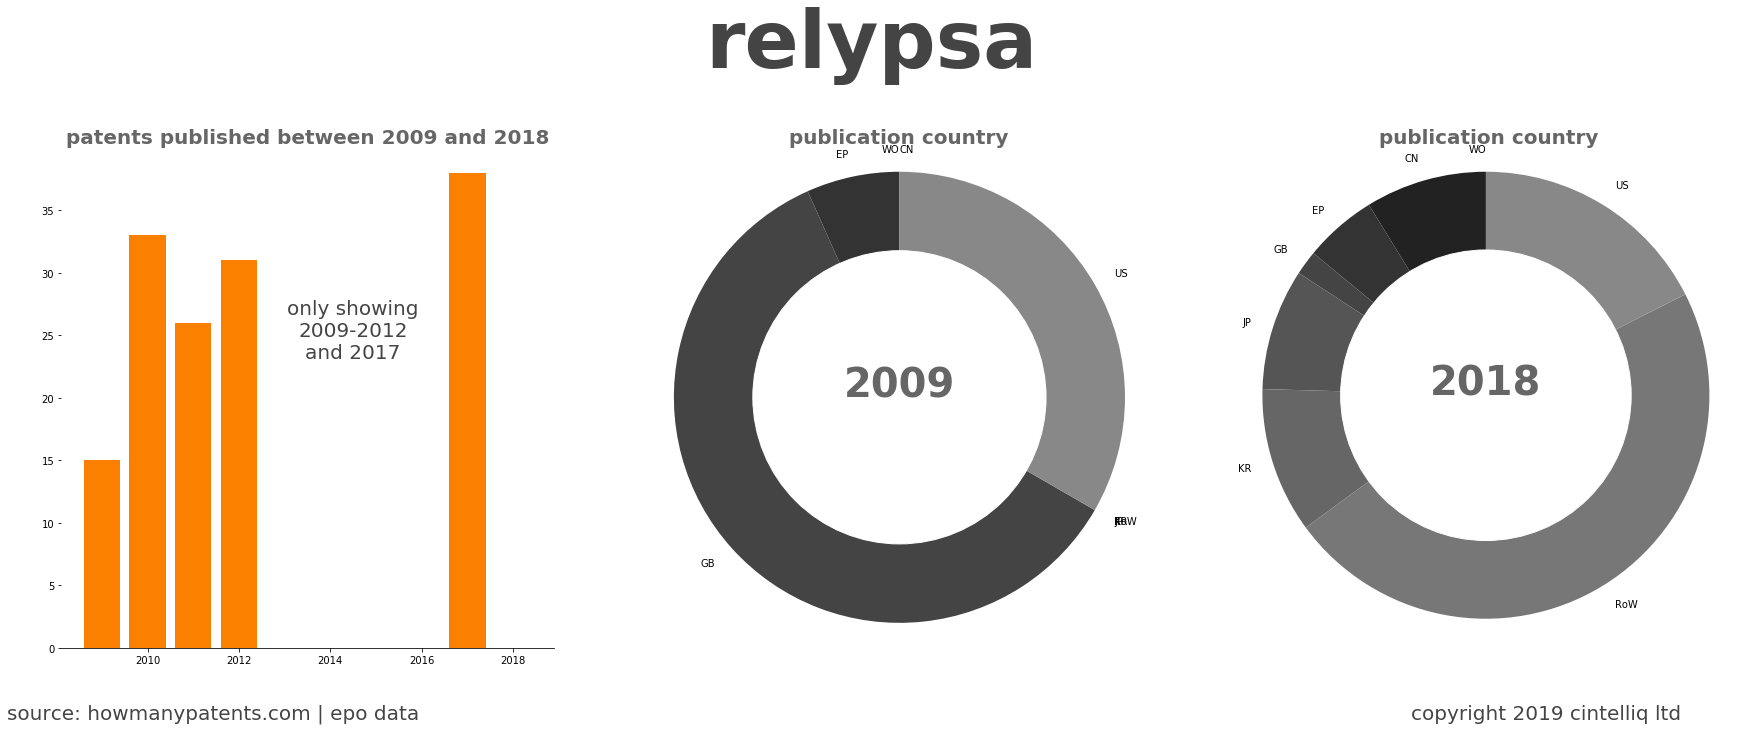 summary of patents for Relypsa